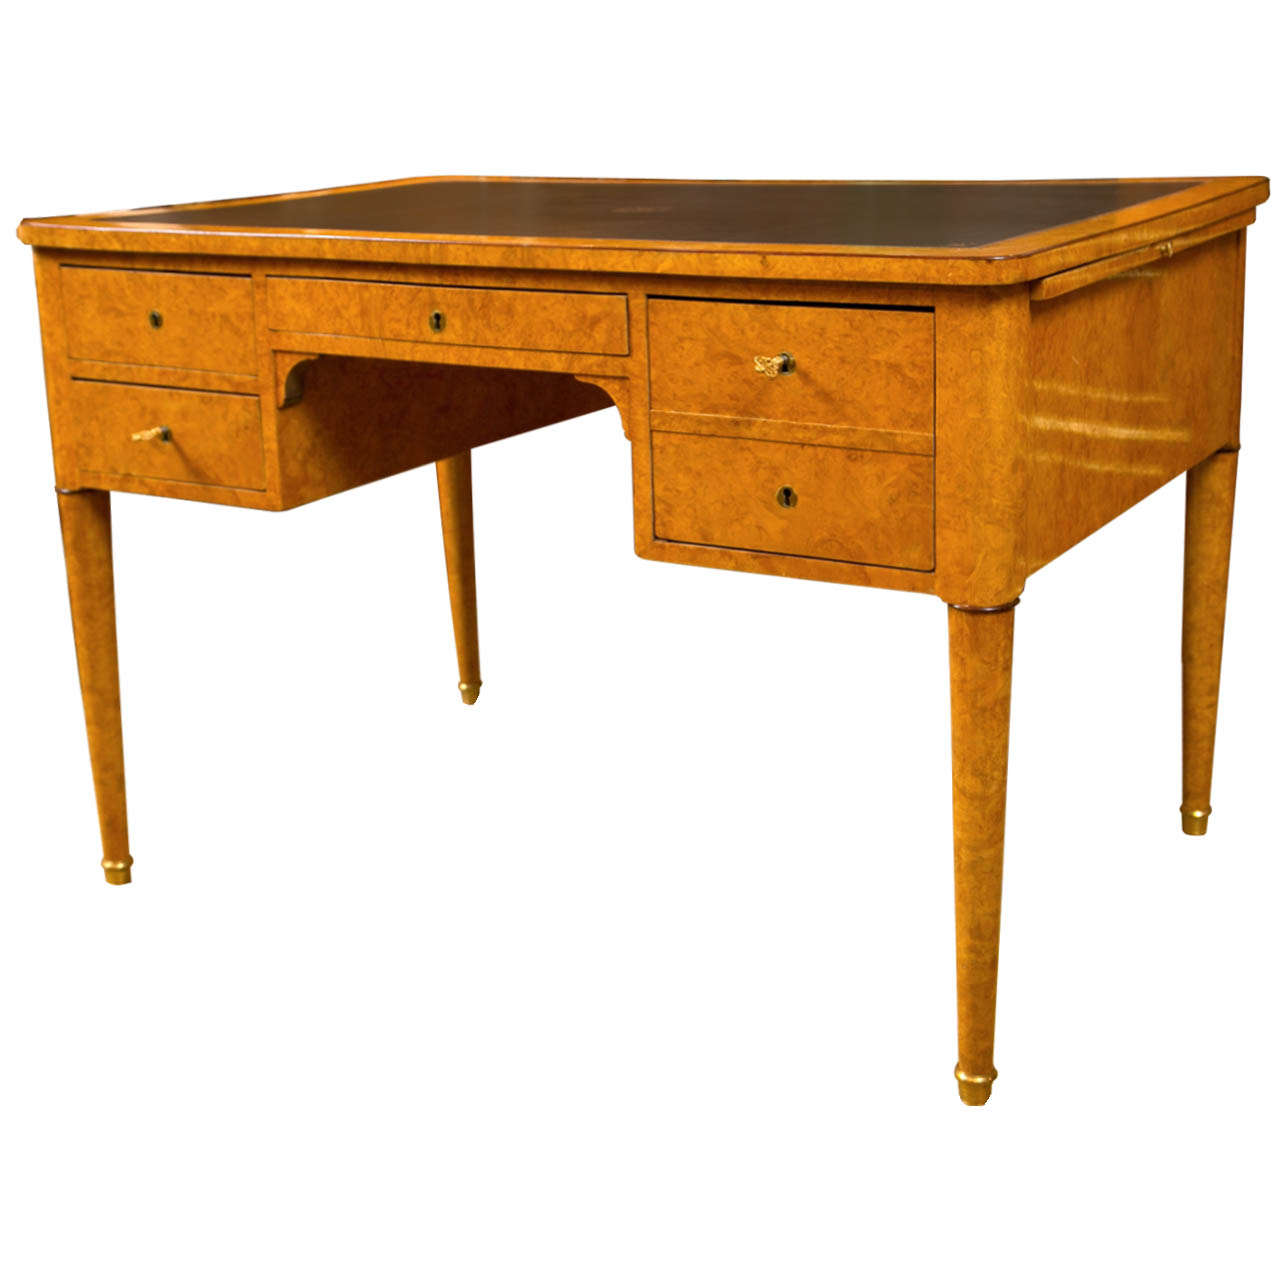 A French Charles X desk or bureau plat with barr ash and amaranth with a leather top. Great quality and secure inner compartments.